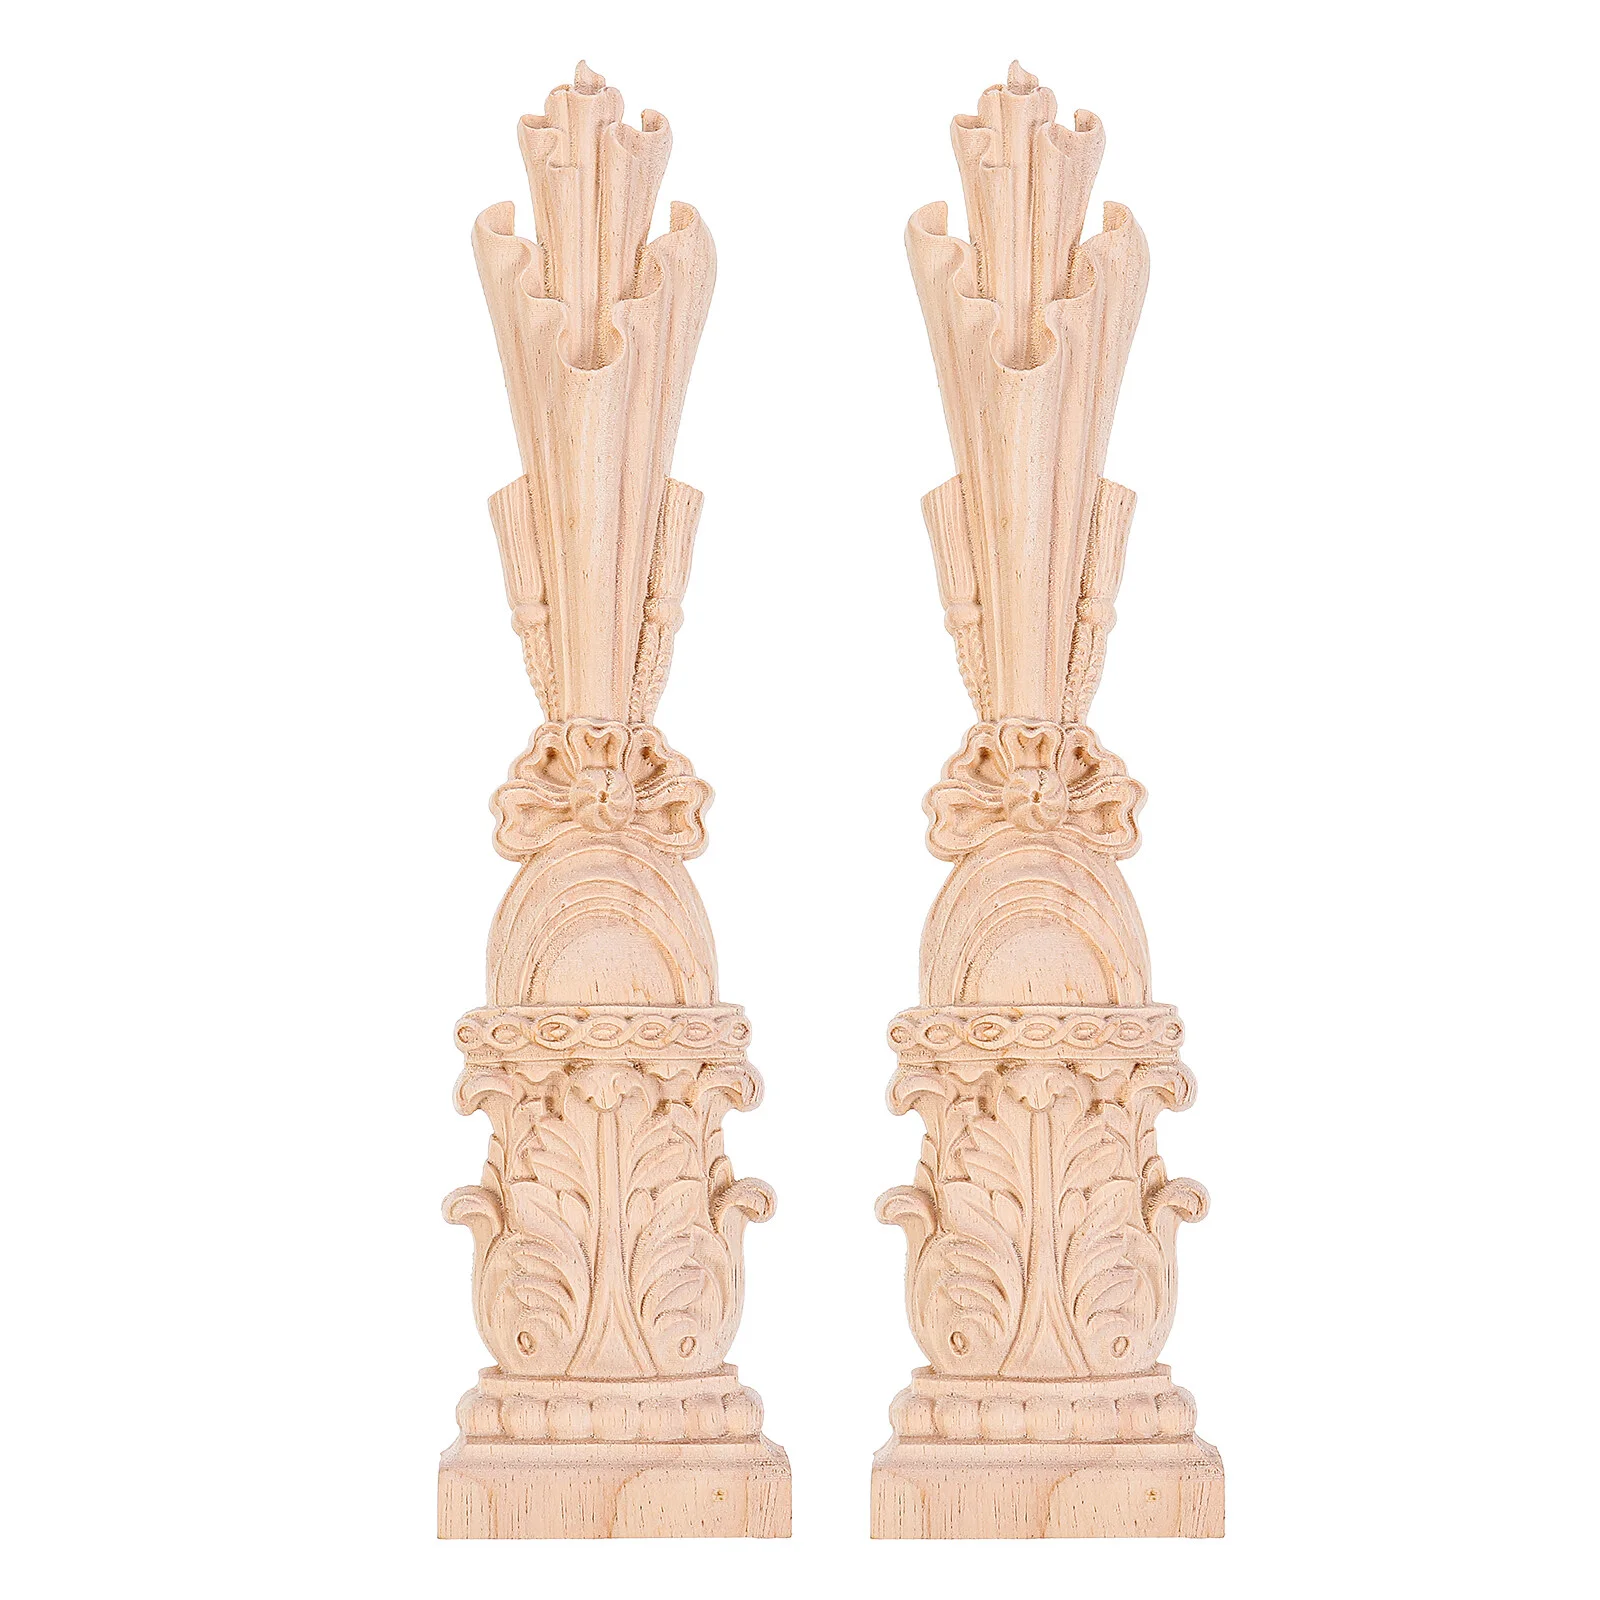 

2 Pcs Wedding Stuff Decorative Wood Vintage European Appliques Carving Retro Wooden Decals Furniture Fireplace Carved Onlay